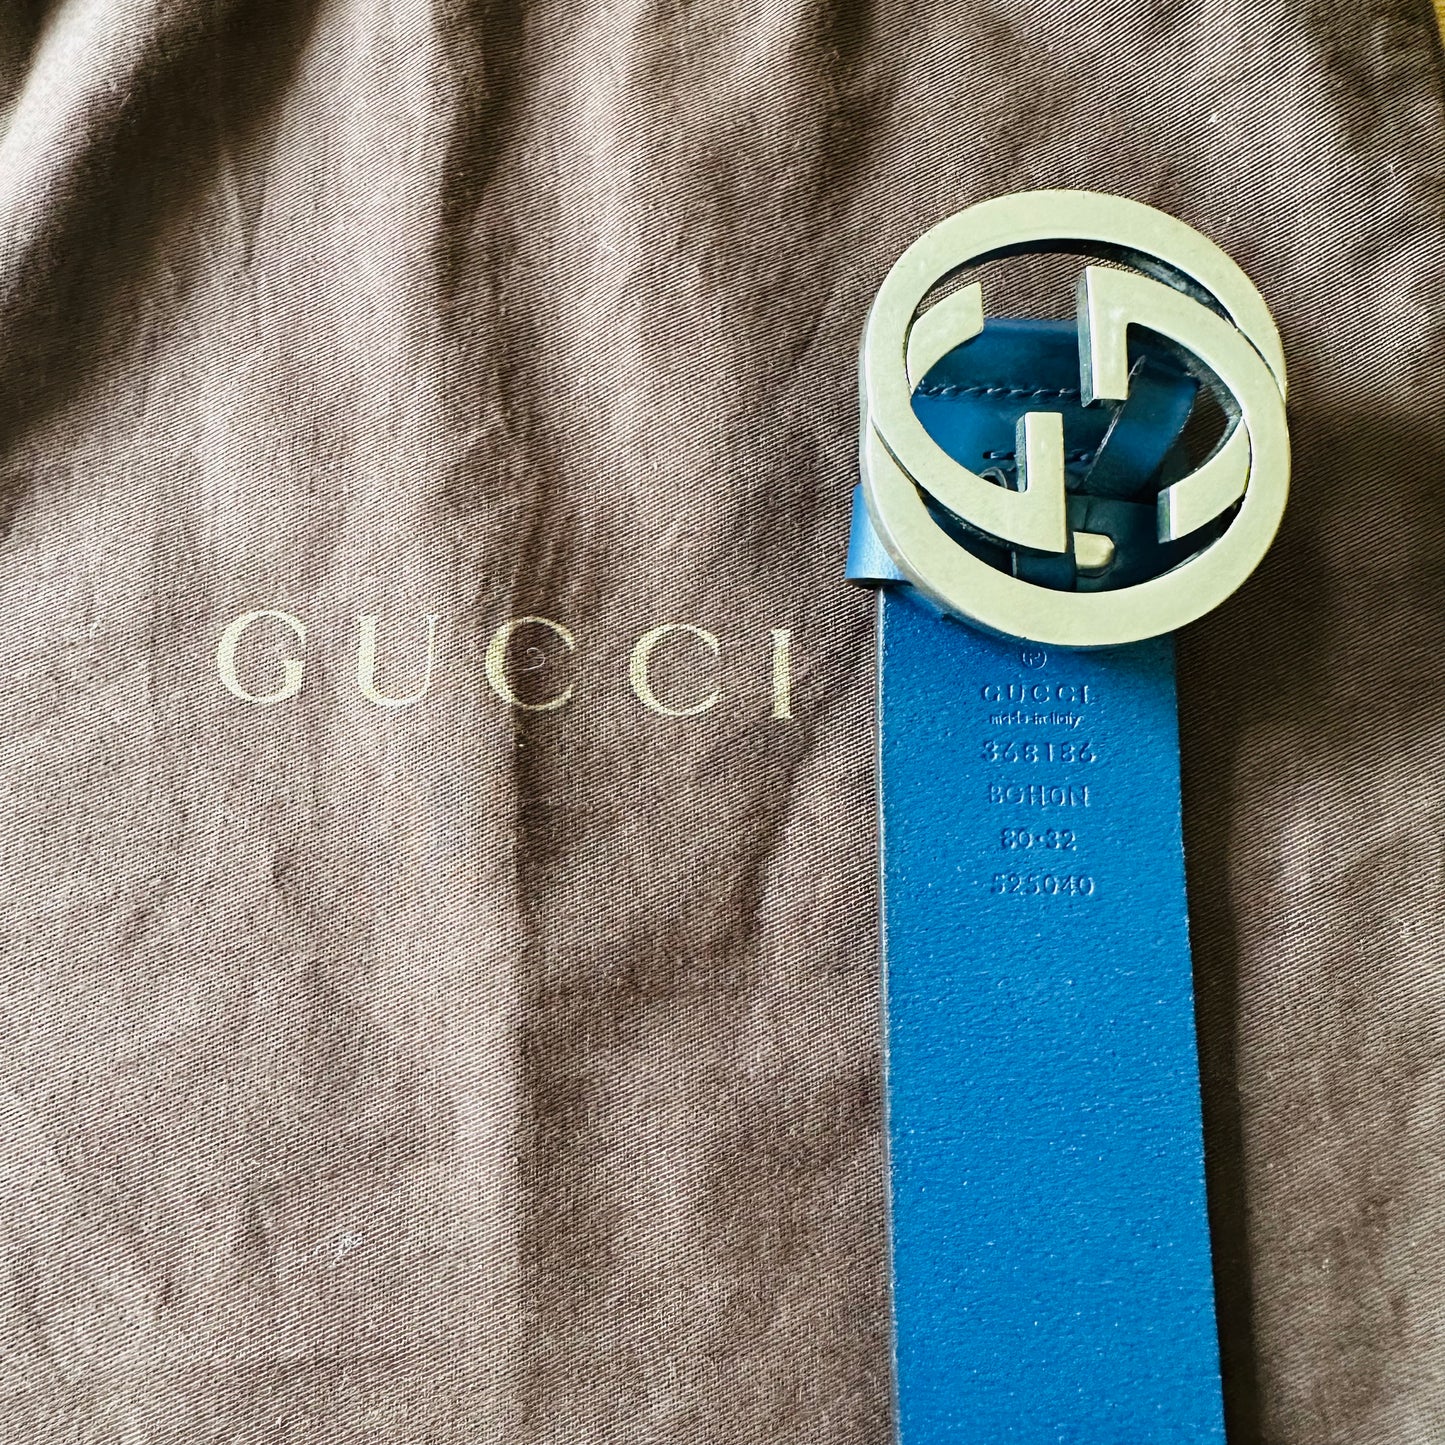 Gucci Leather Belt - Size 32 Inches